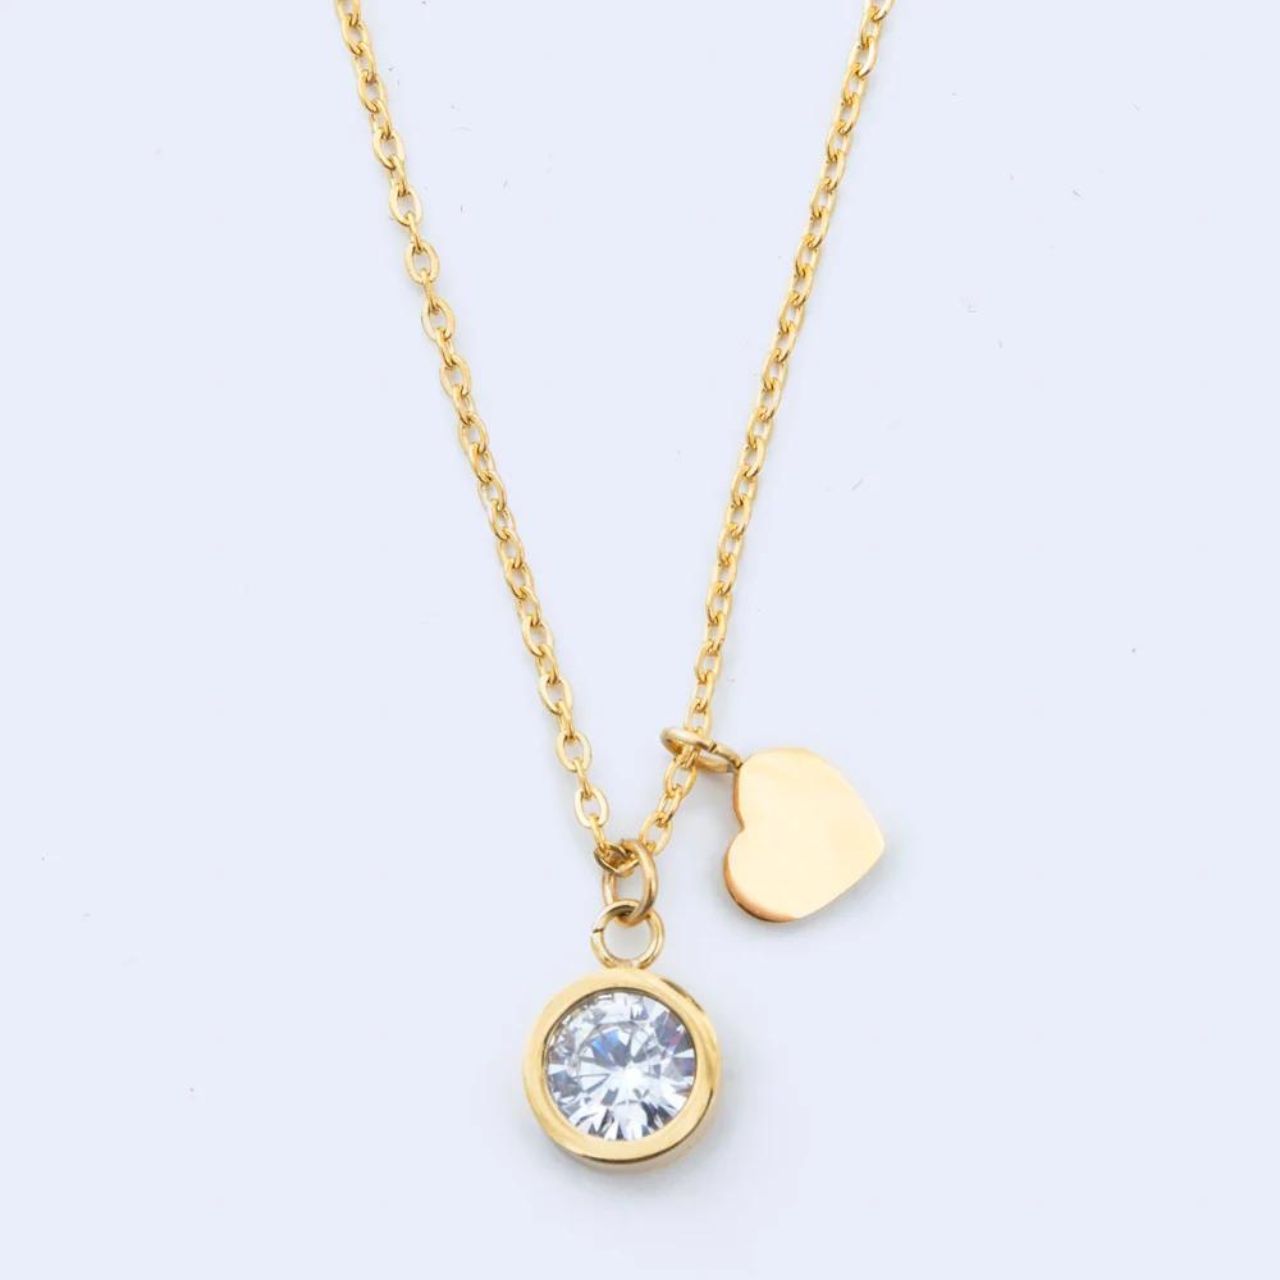 Solitaire Pendant by Knight & Day  Beautiful solitaire with simple heart charm.  Length 41 + 5cm extension. Gold plating.